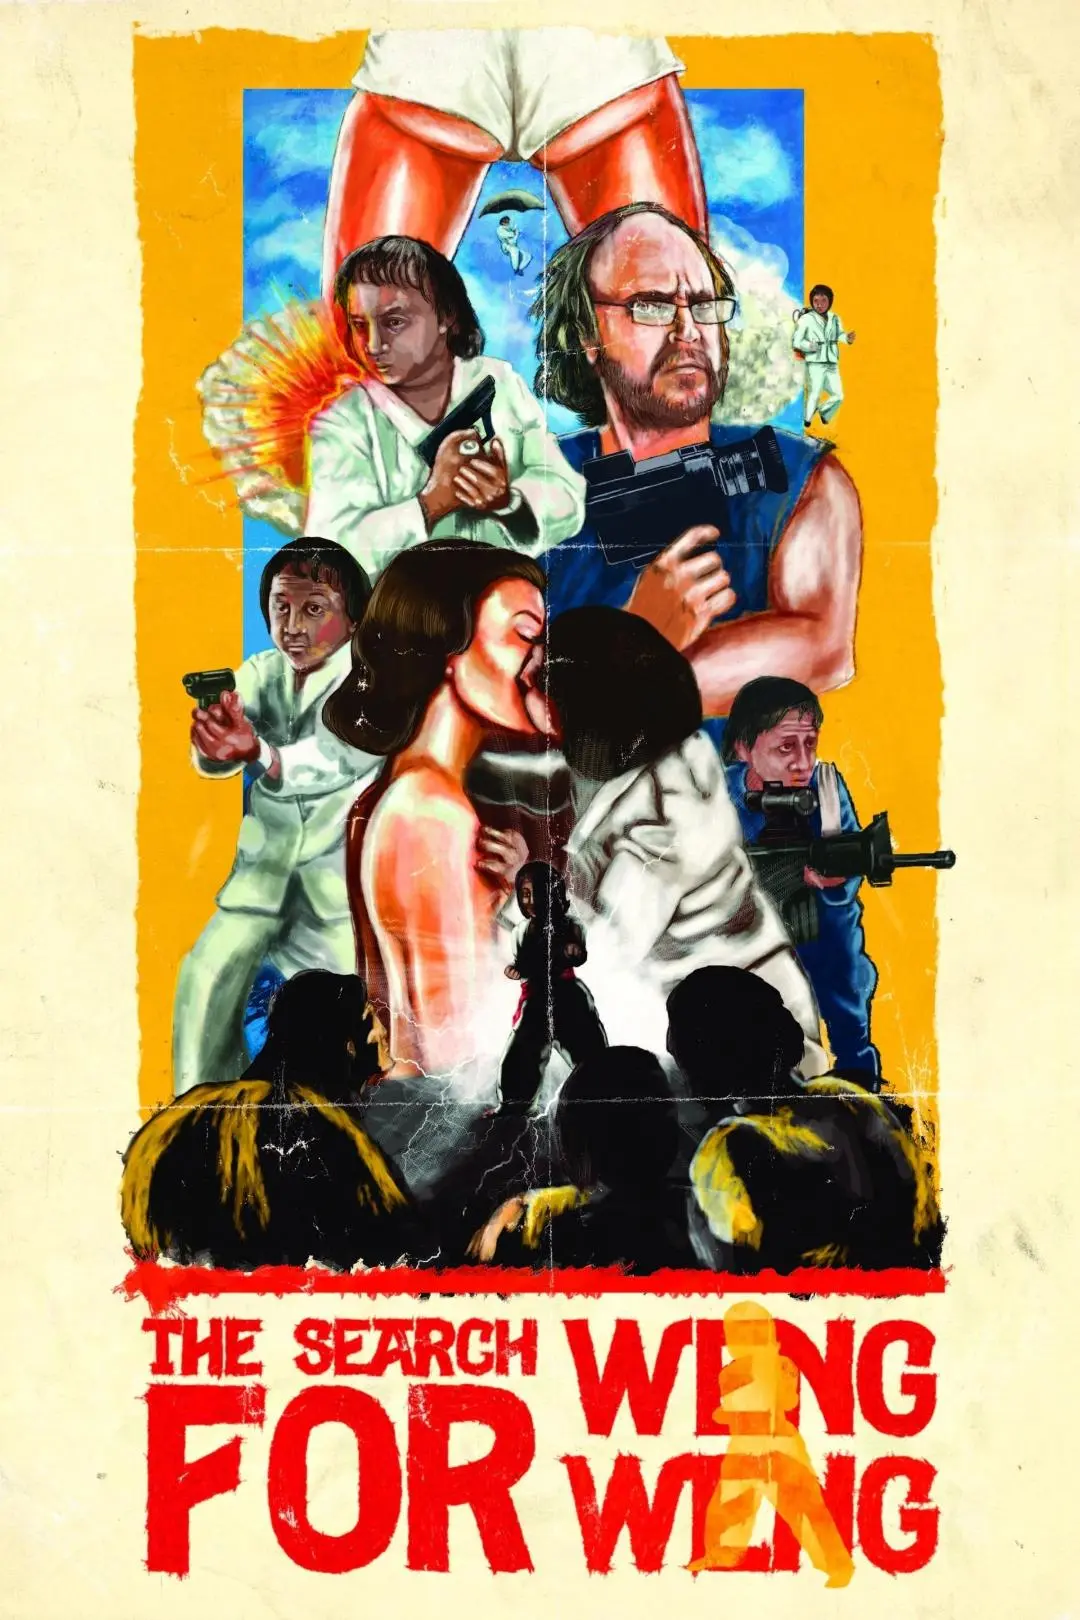 The Search for Weng Weng_peliplat